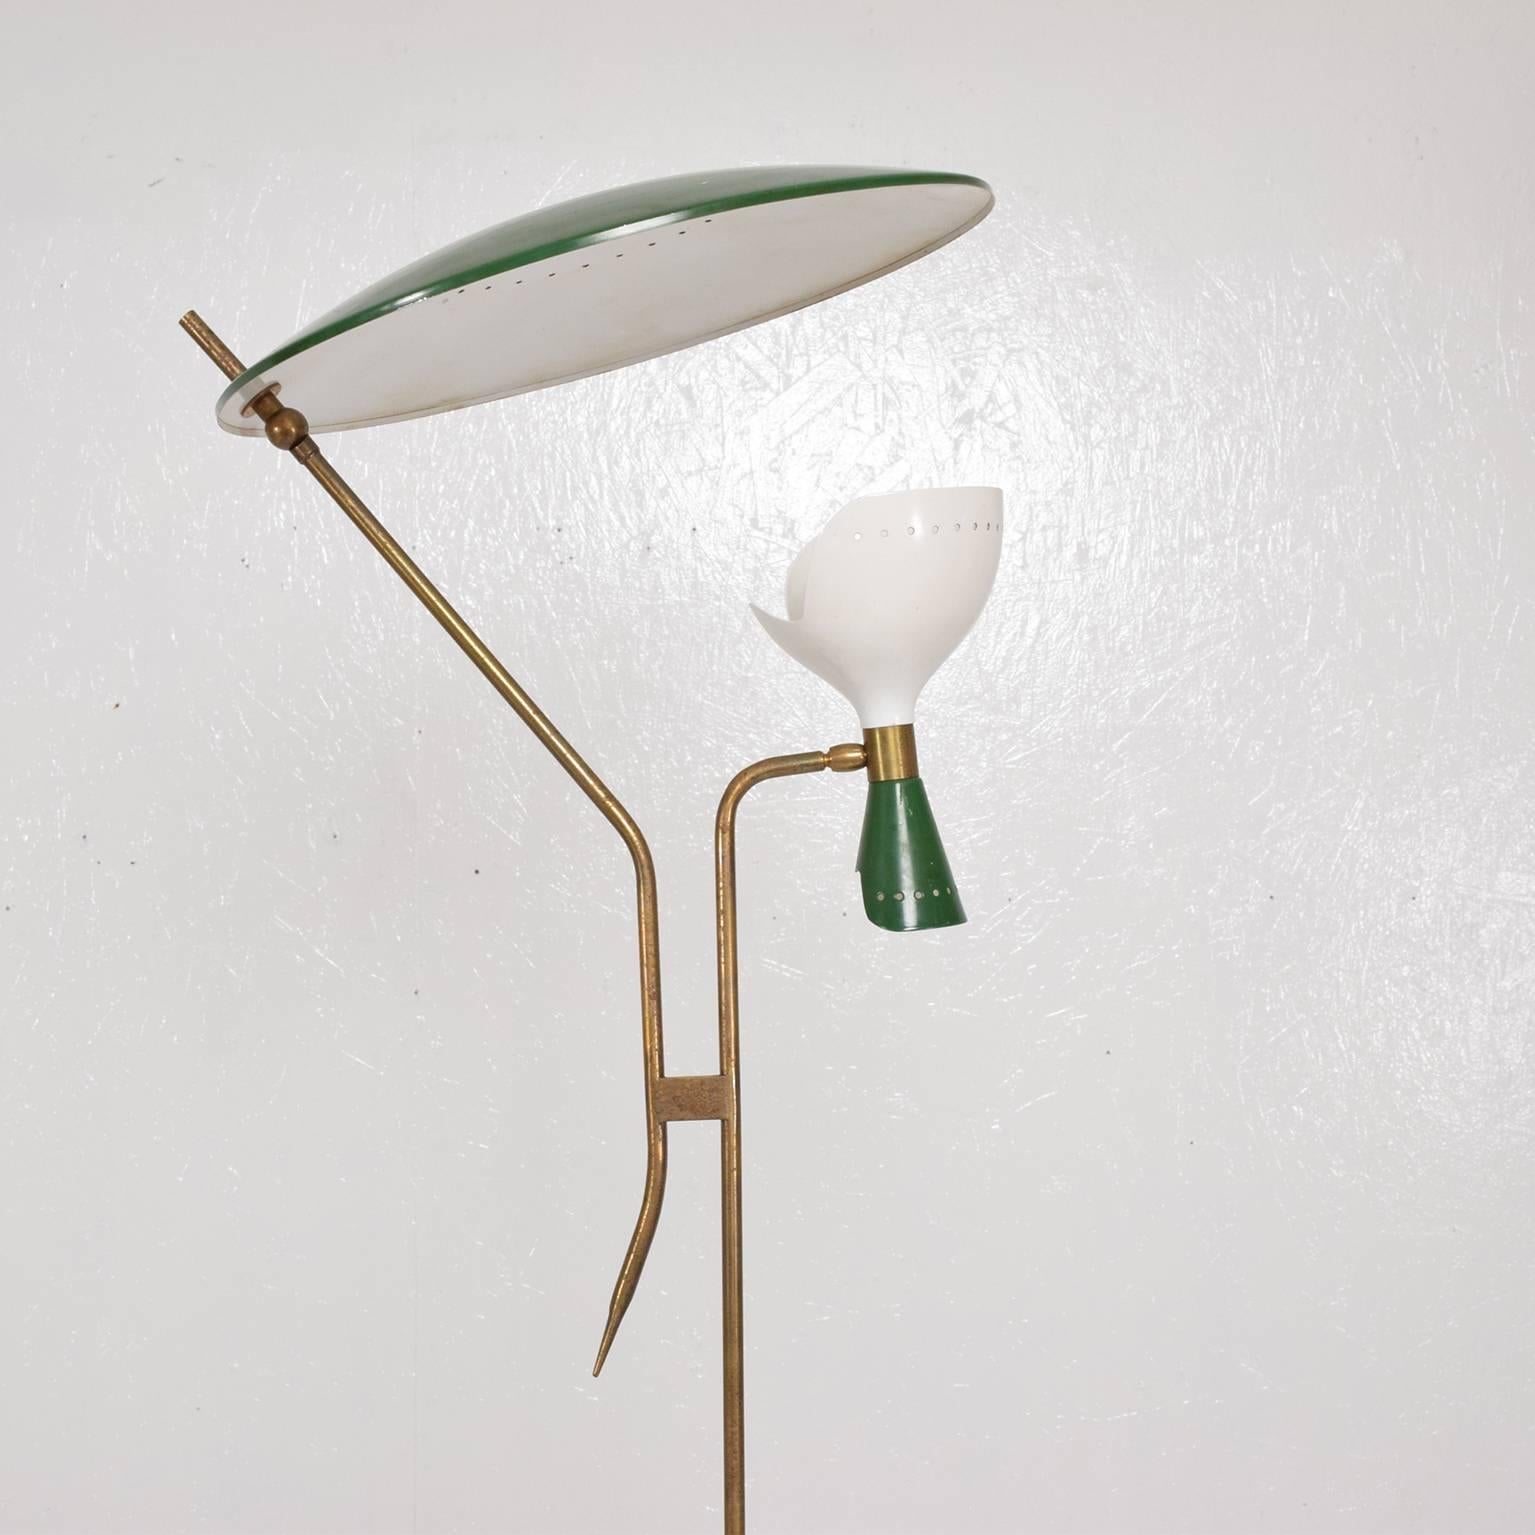 For your consideration a beautiful sculptural floor lamp. Attributed to Stilnovo. Made in Italy. Stamp from the maker not present. 
Brass body with original patina. Dark green marble base with green reflector in top and dual cone shade in